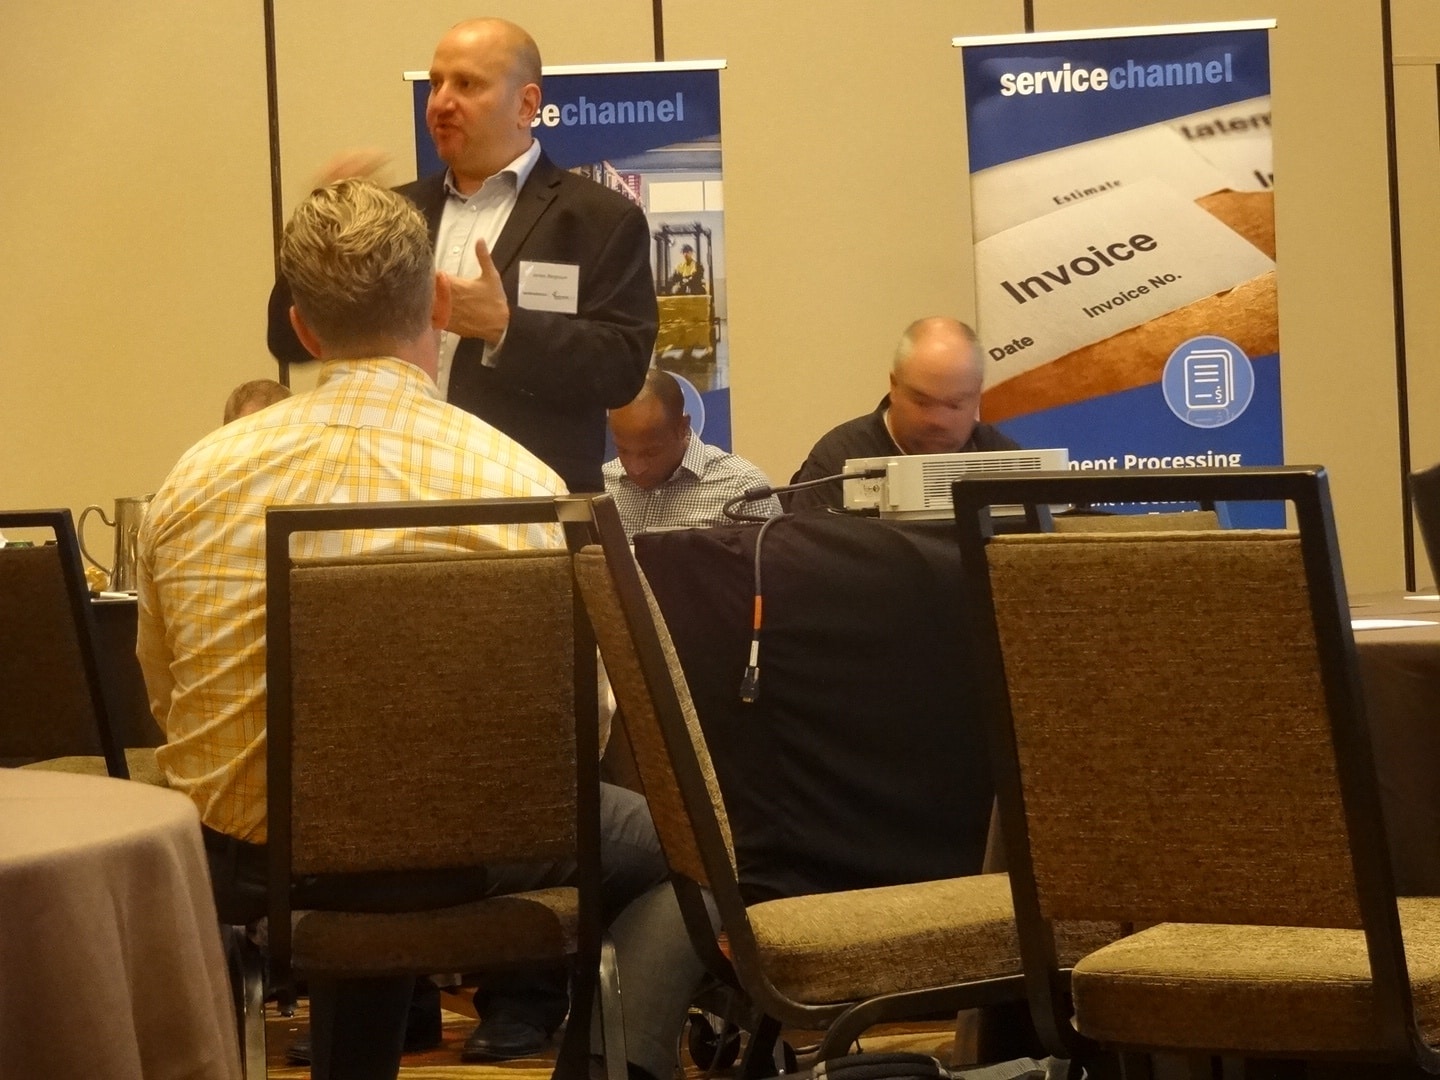 Jordan Bergtram, VP Product Mgmt, discussing FM software with ServiceChannel clients